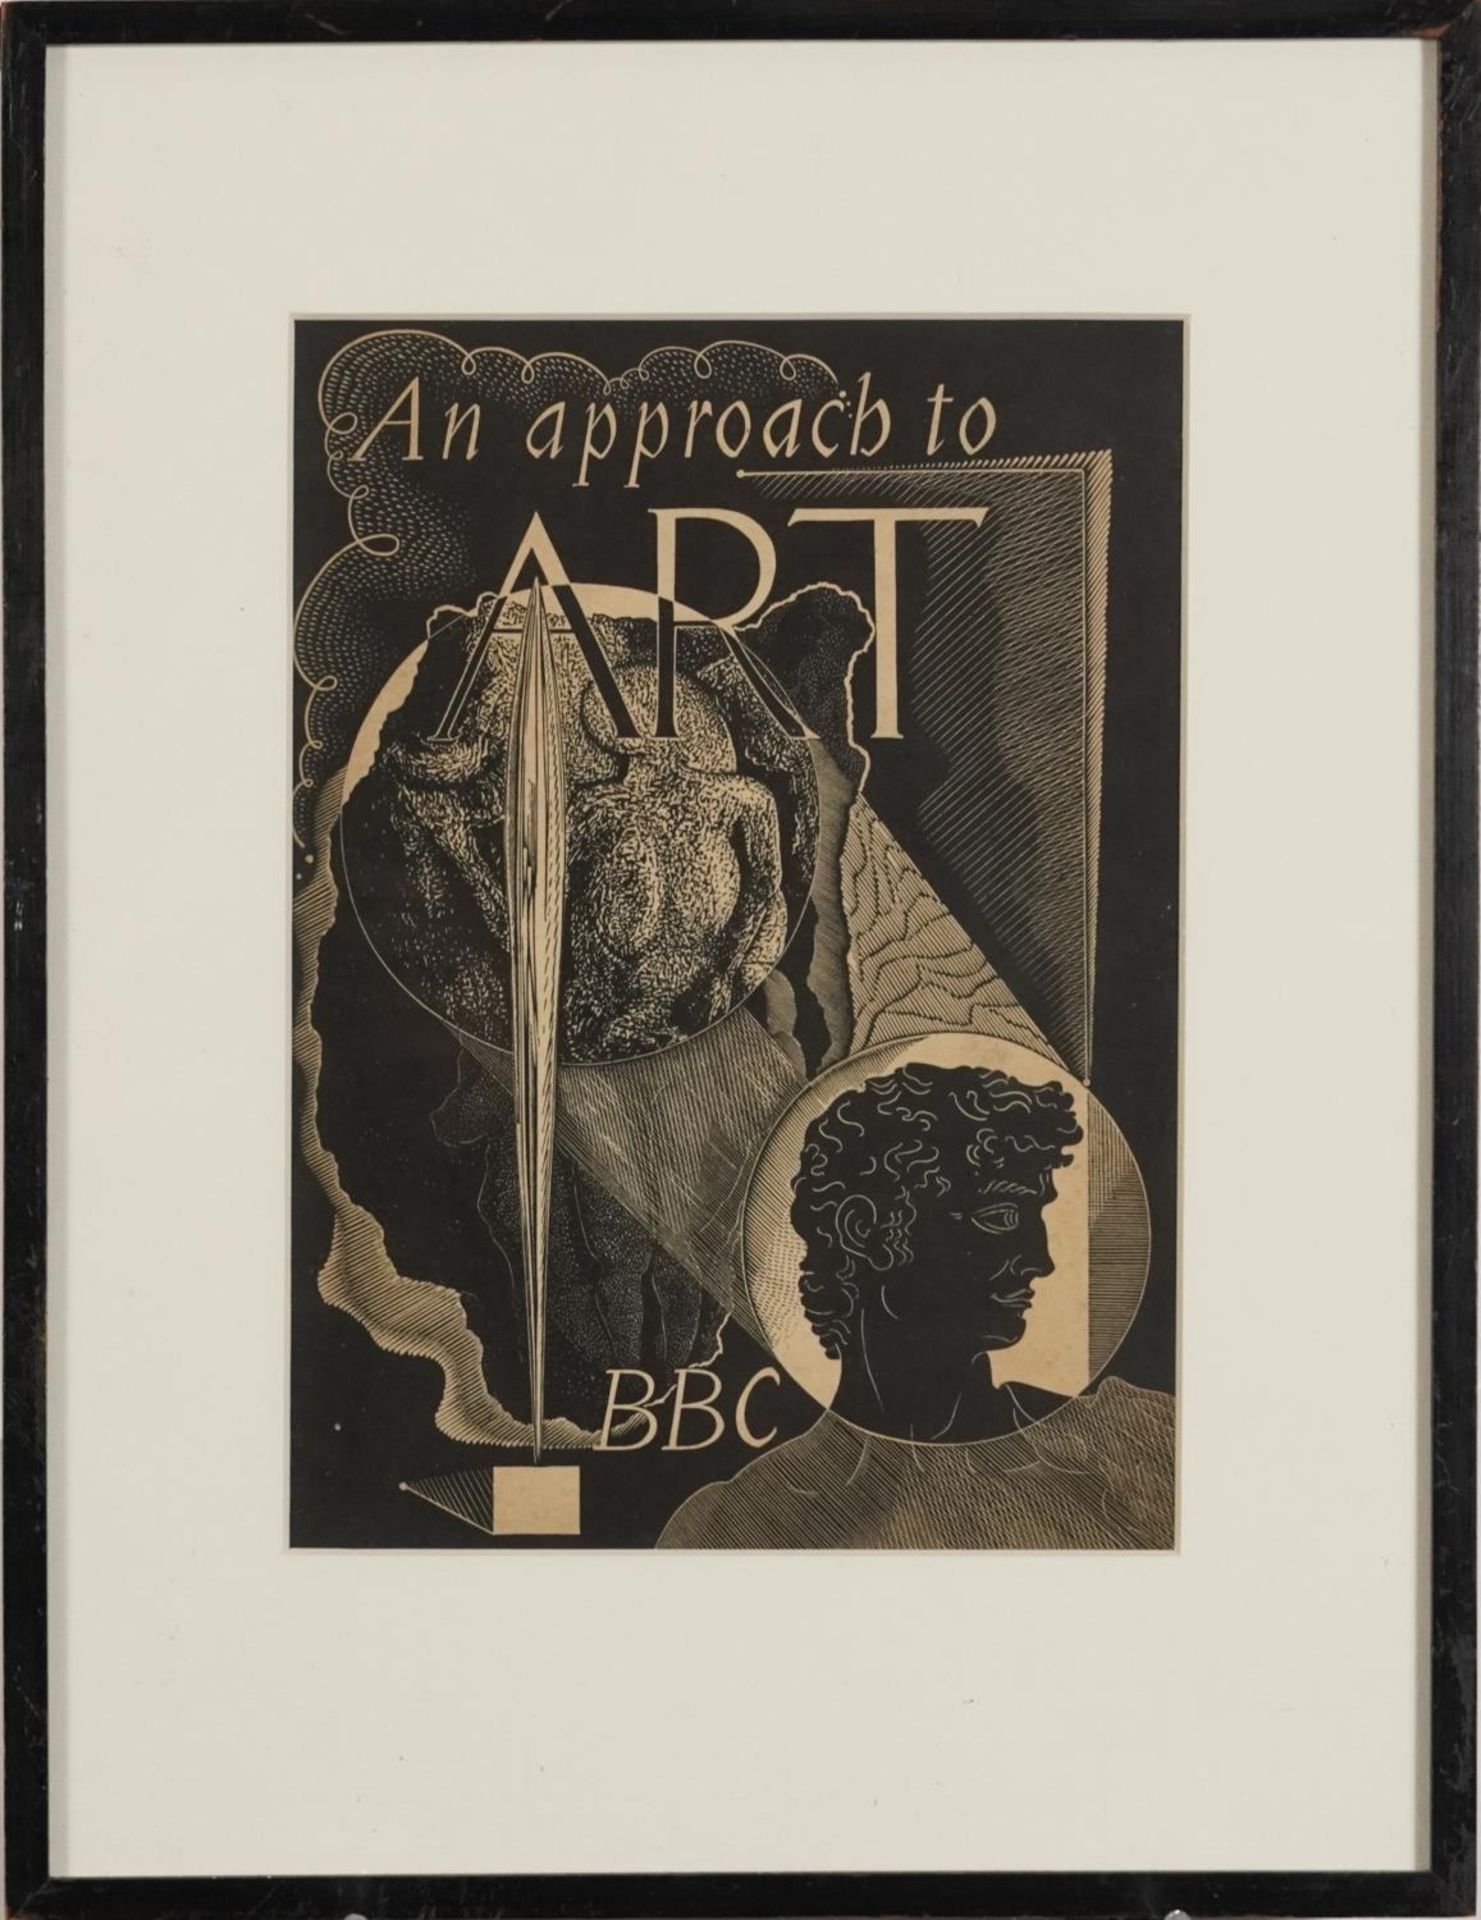 Blair Hughes-Stanton - An Approach to Art, wood engraving, inscribed Published by BBC 1935 verso, - Image 2 of 4